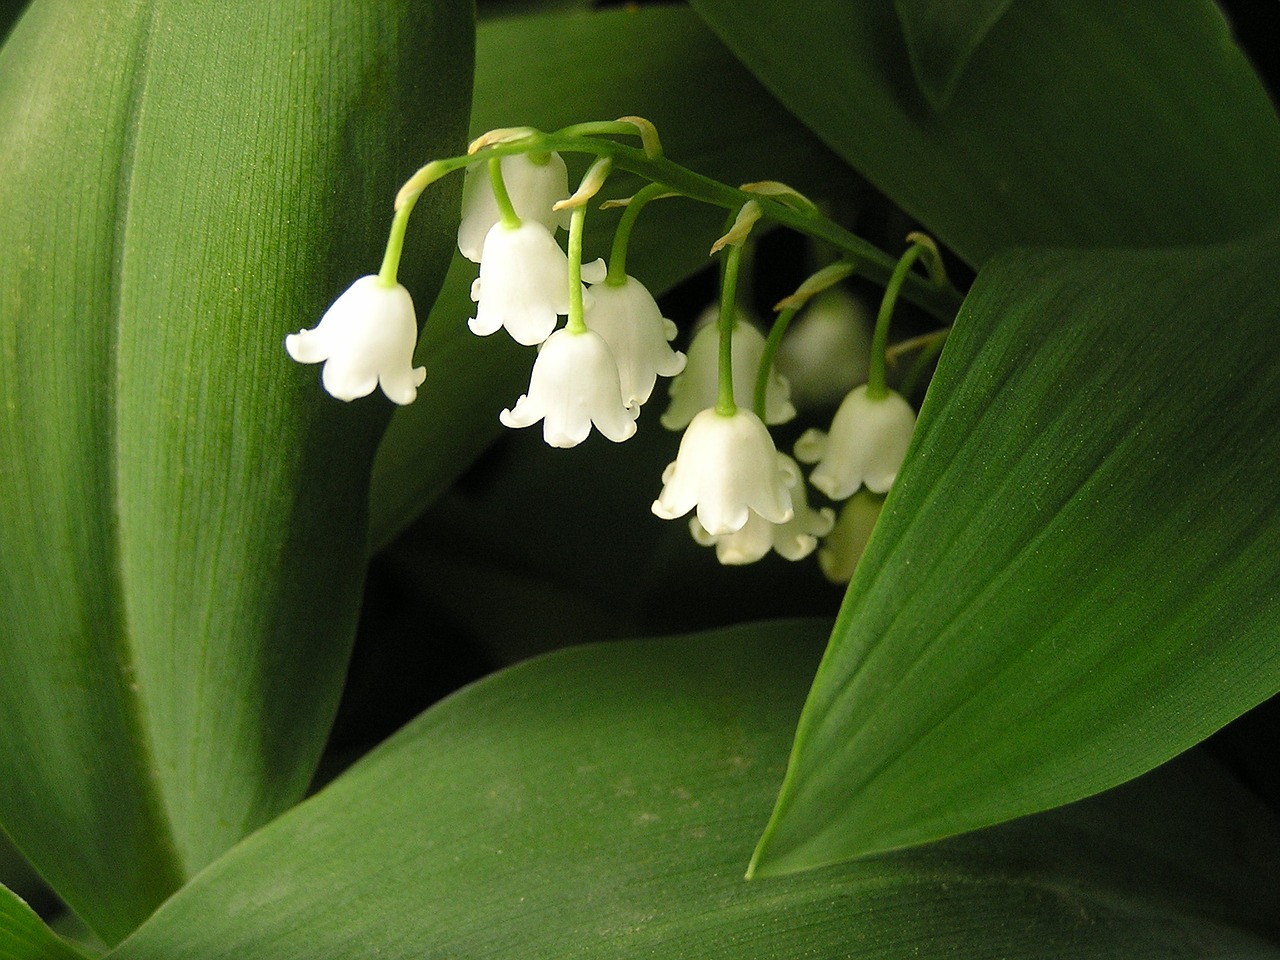 lily of the valley flower blossom free photo